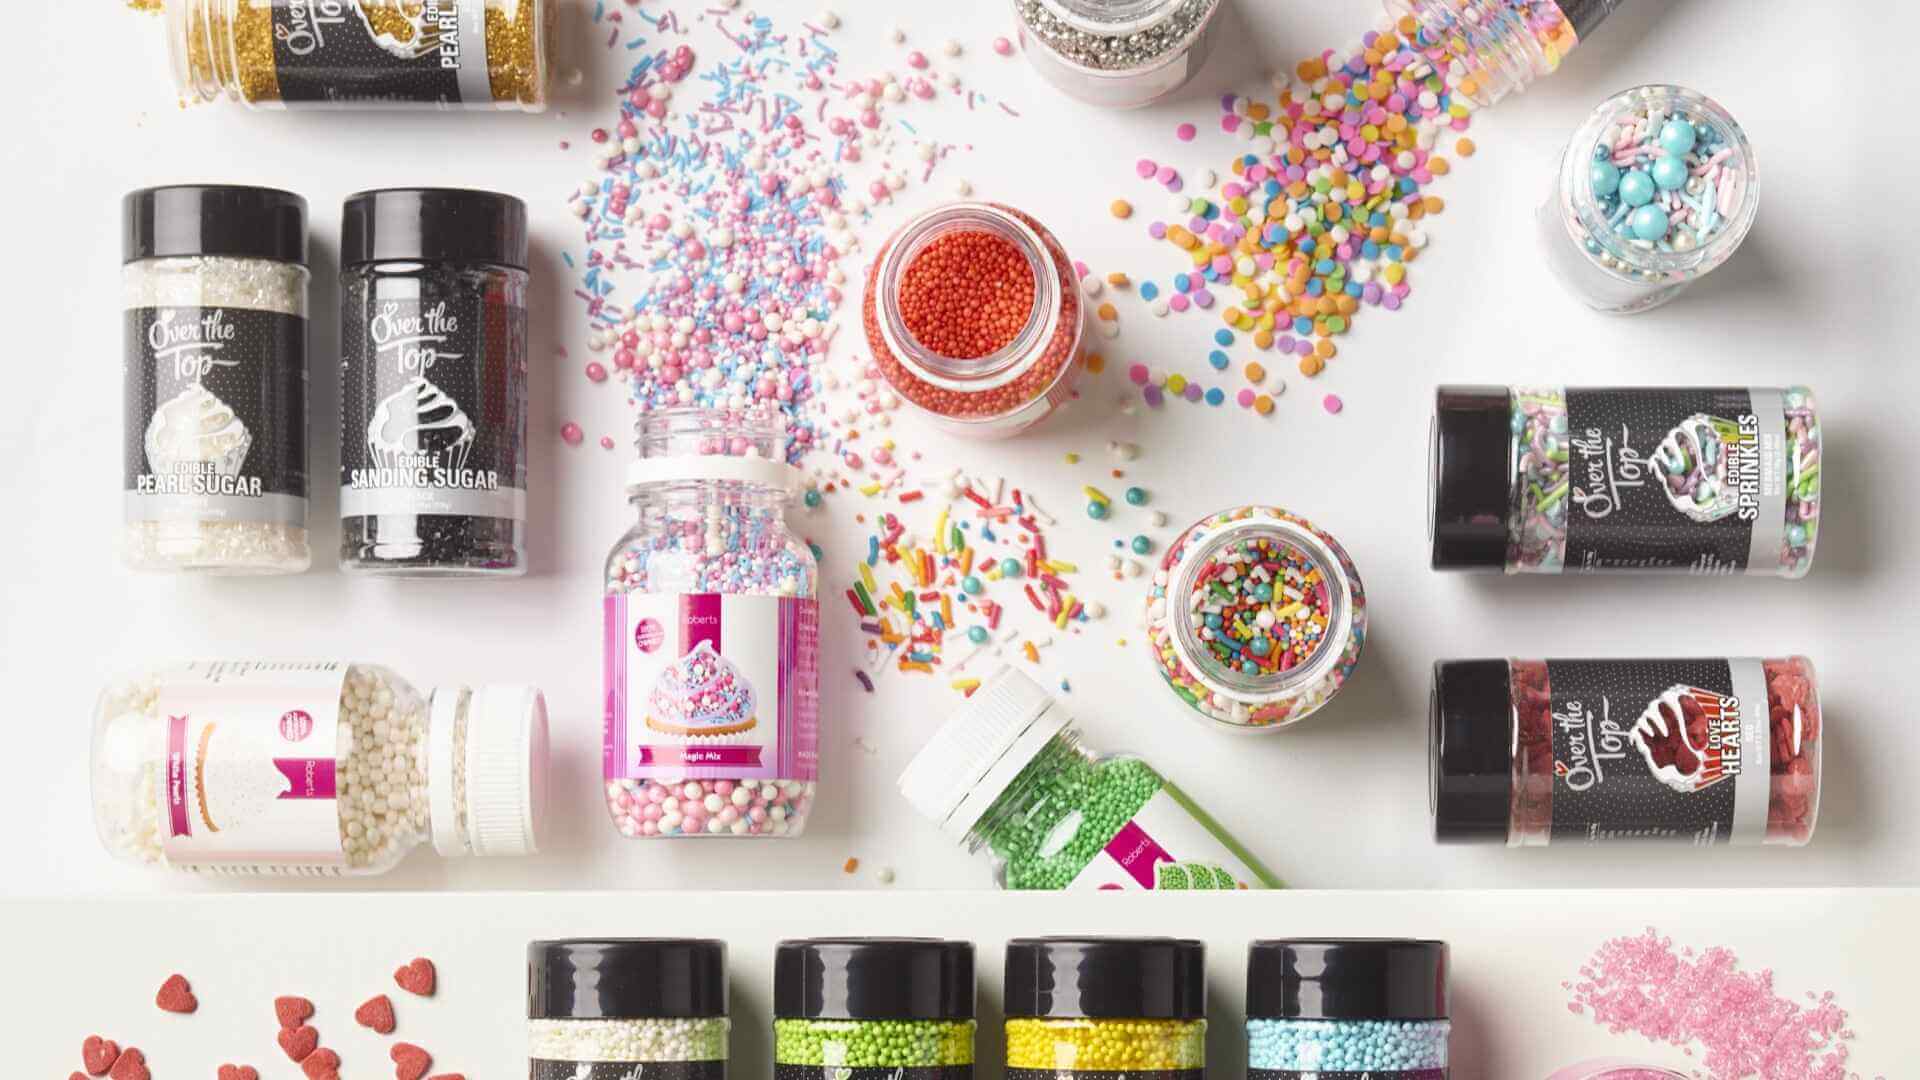 Sweet Treats: Your Guide To Cake Decorations & Edible Toppings